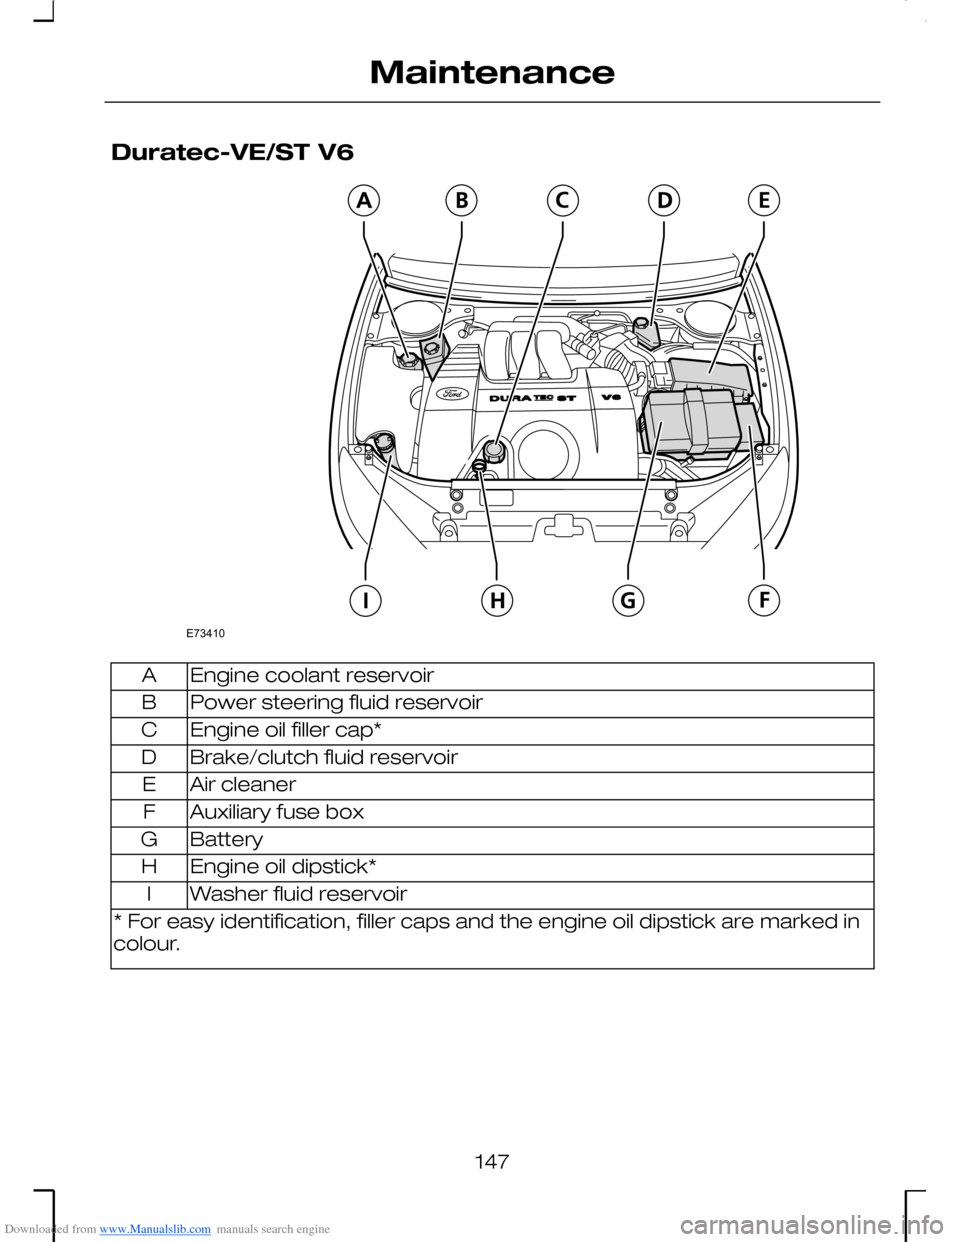 FORD MONDEO 2006 2.G Owners Manual Downloaded from www.Manualslib.com manuals search engine Duratec-VE/ST V6
Engine coolant reservoirA
Power steering fluid reservoirB
Engine oil filler cap*C
Brake/clutch fluid reservoirD
Air cleanerE
A